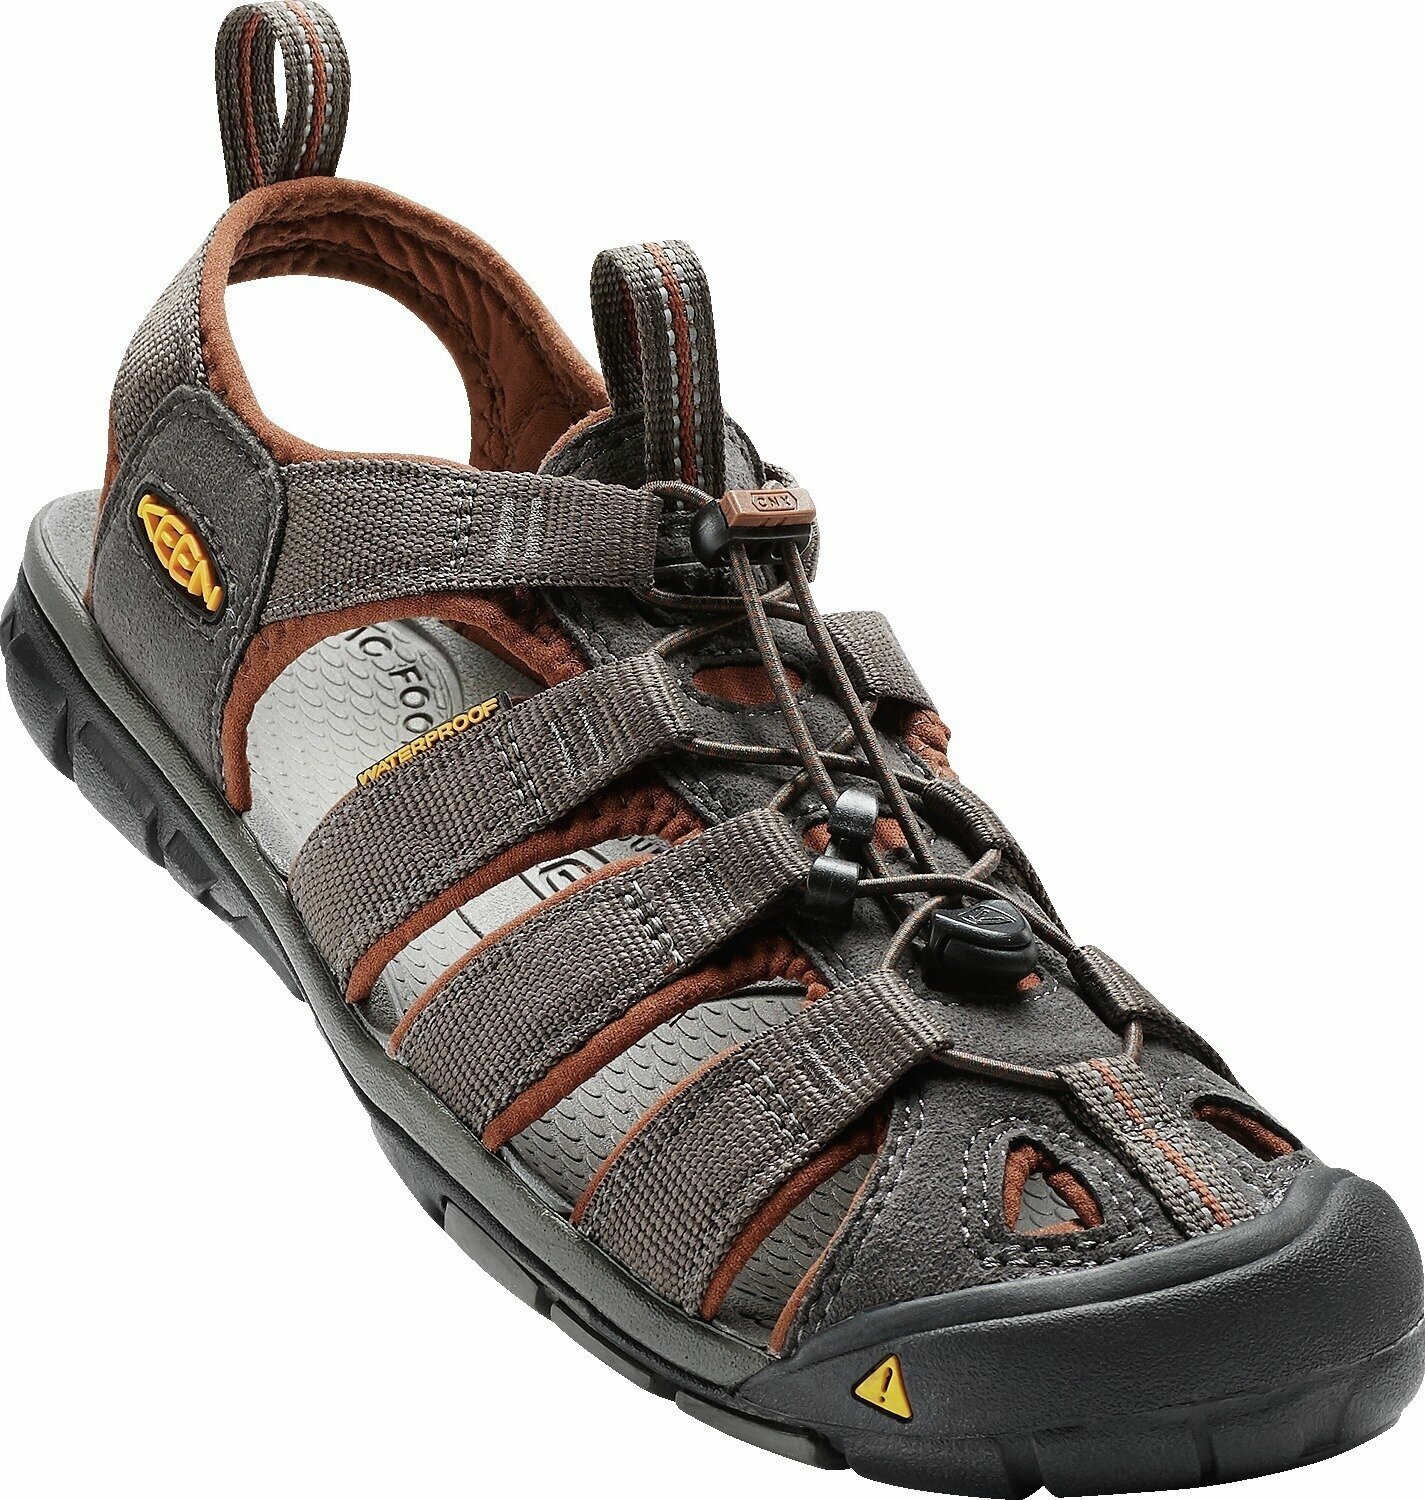 Mens Outdoor Shoes Keen Men's Clearwater CNX Sandal Raven/Tortoise Shell 44 Mens Outdoor Shoes